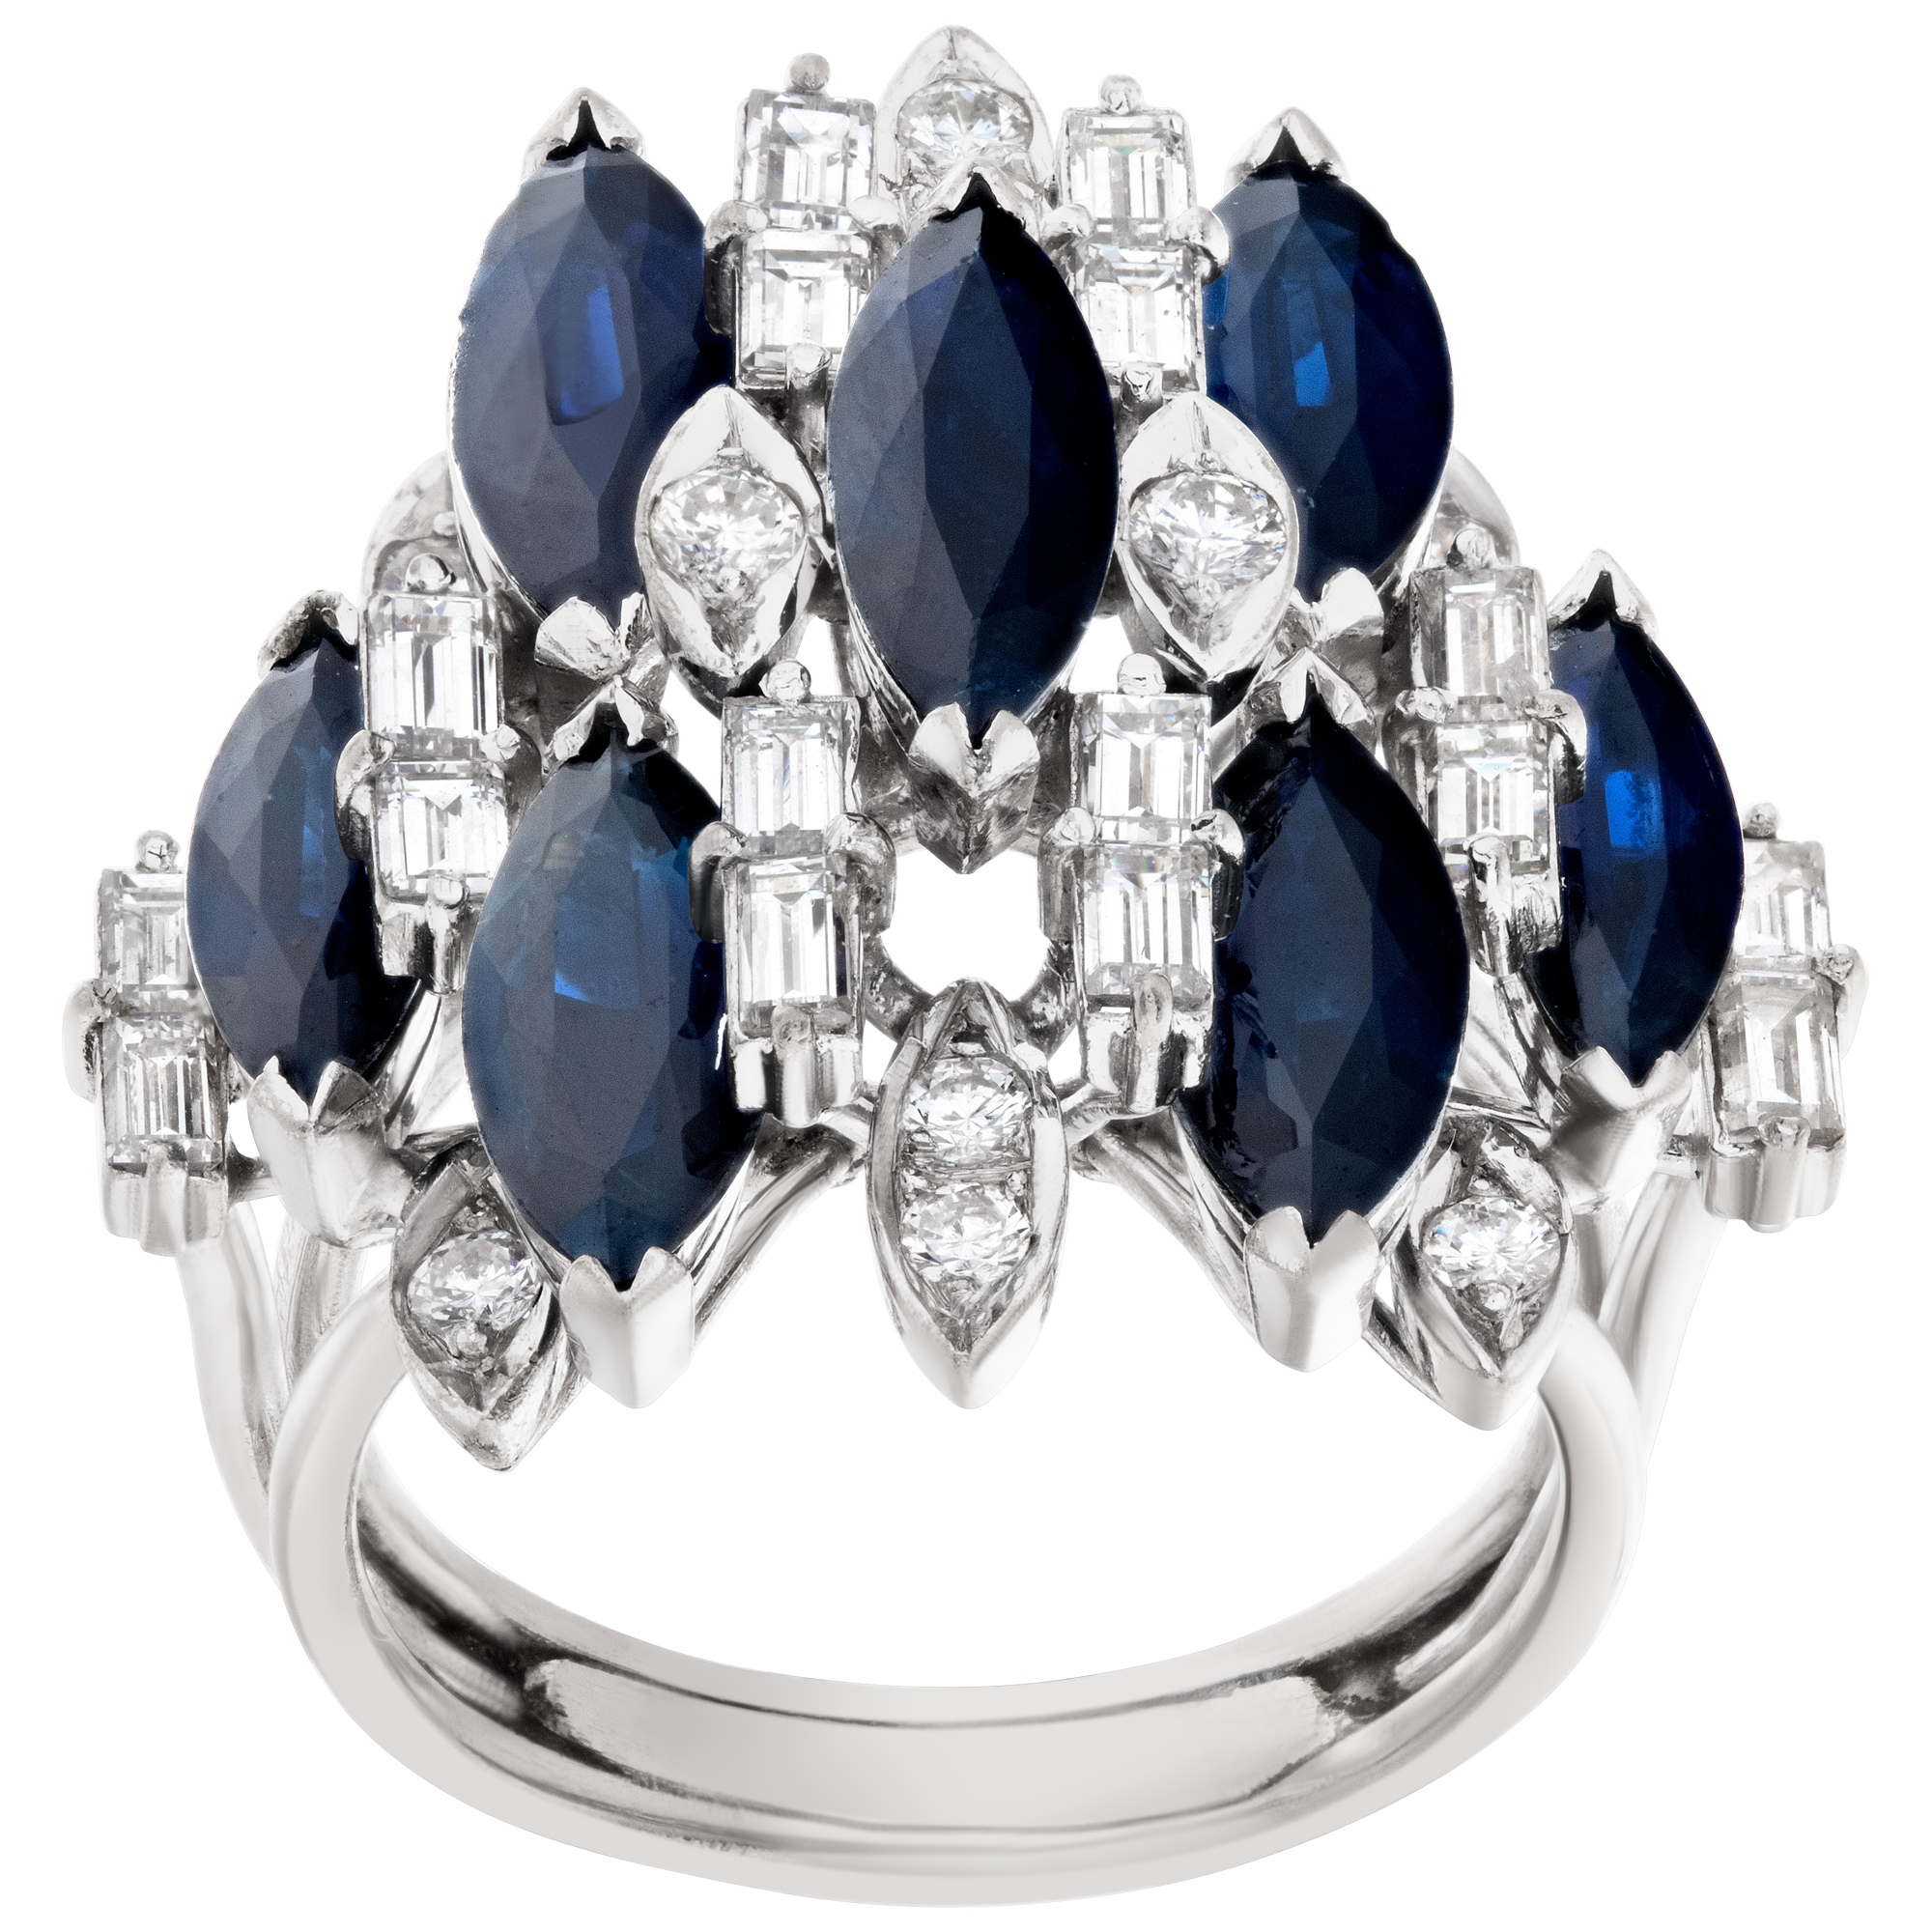 Blue sapphire and diamond ring in 14k white gold